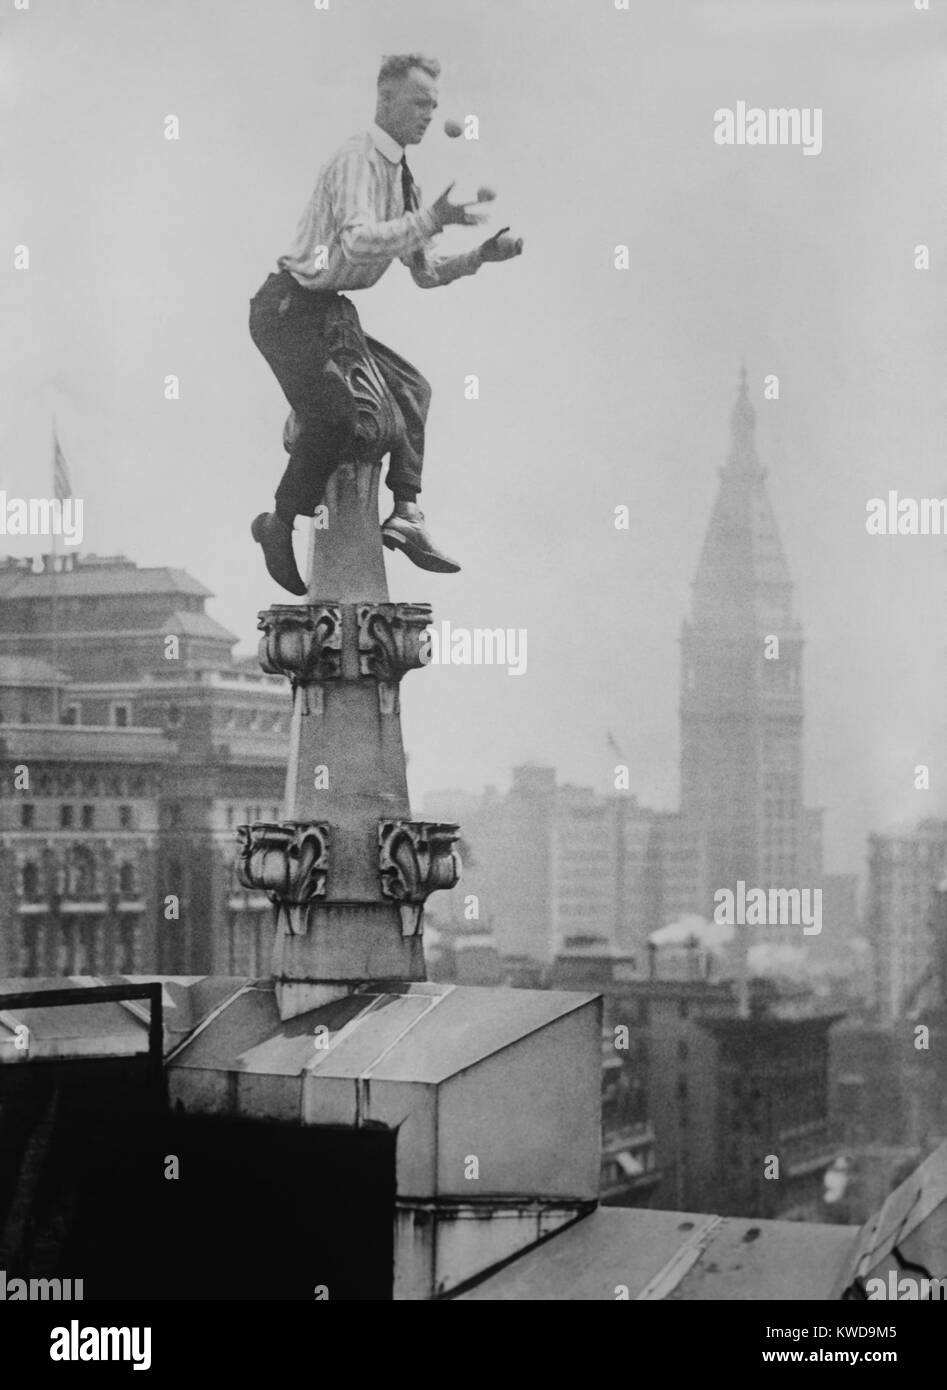 'Human Fly' John 'Jammie' Reynolds juggles while balancing atop a roof decoration in New York City. In the distance is the New York Life Building at the Madison Square Park. Ca. 1915-1920. (BSLOC 2015 17 169) Stock Photo